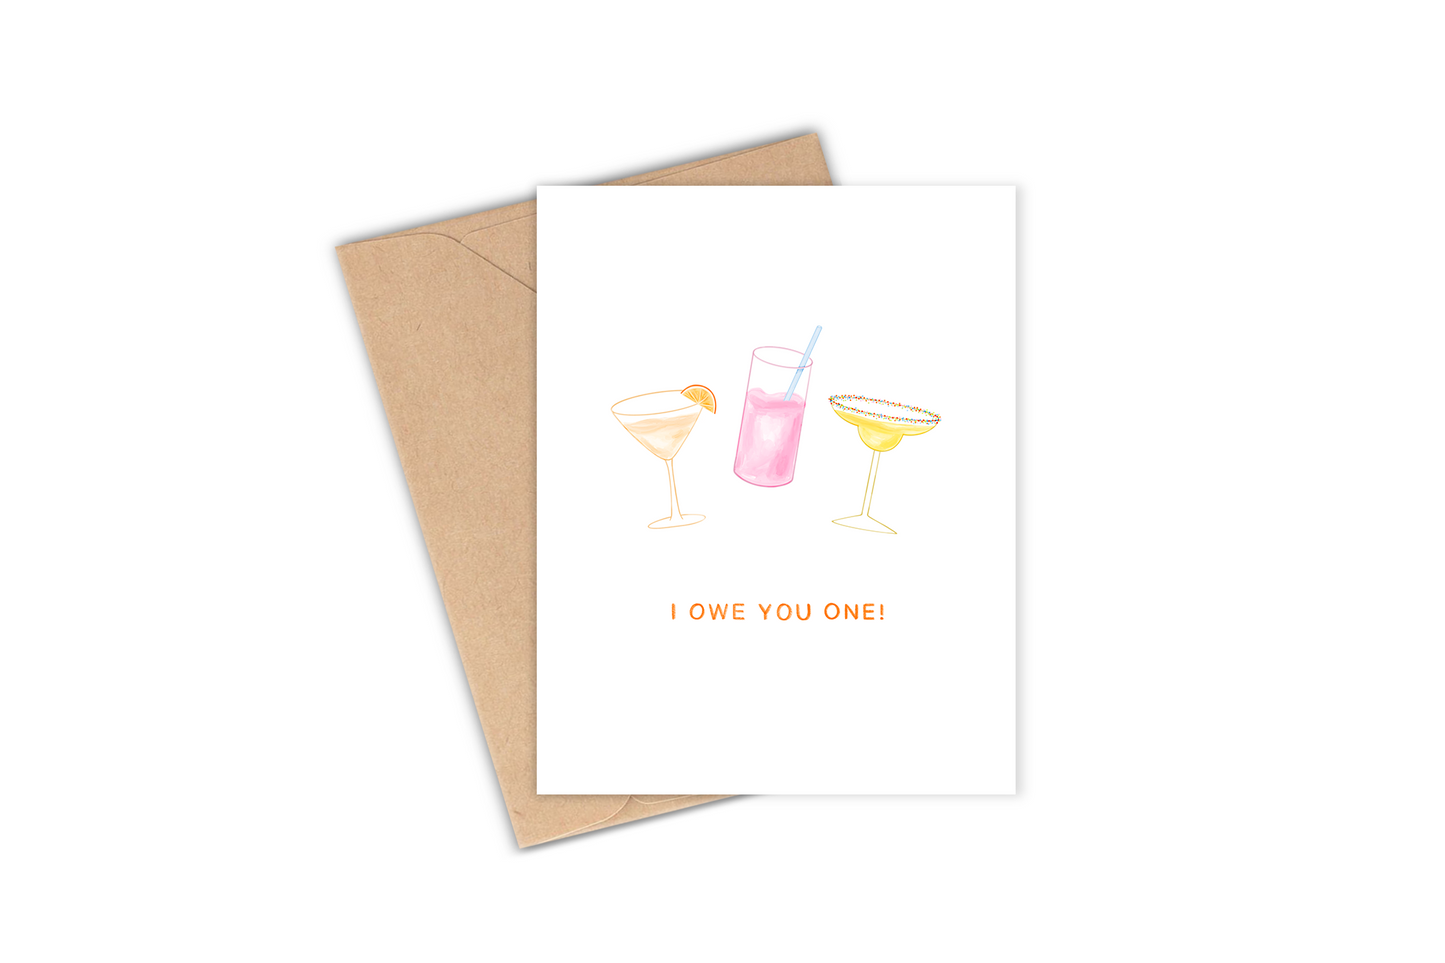 You want to know the best way to thank your friend? With a drink and a hand written card of course! This thank you card features 3 hand-drawn watercolor cocktails with the phrase "I owe you one!" 